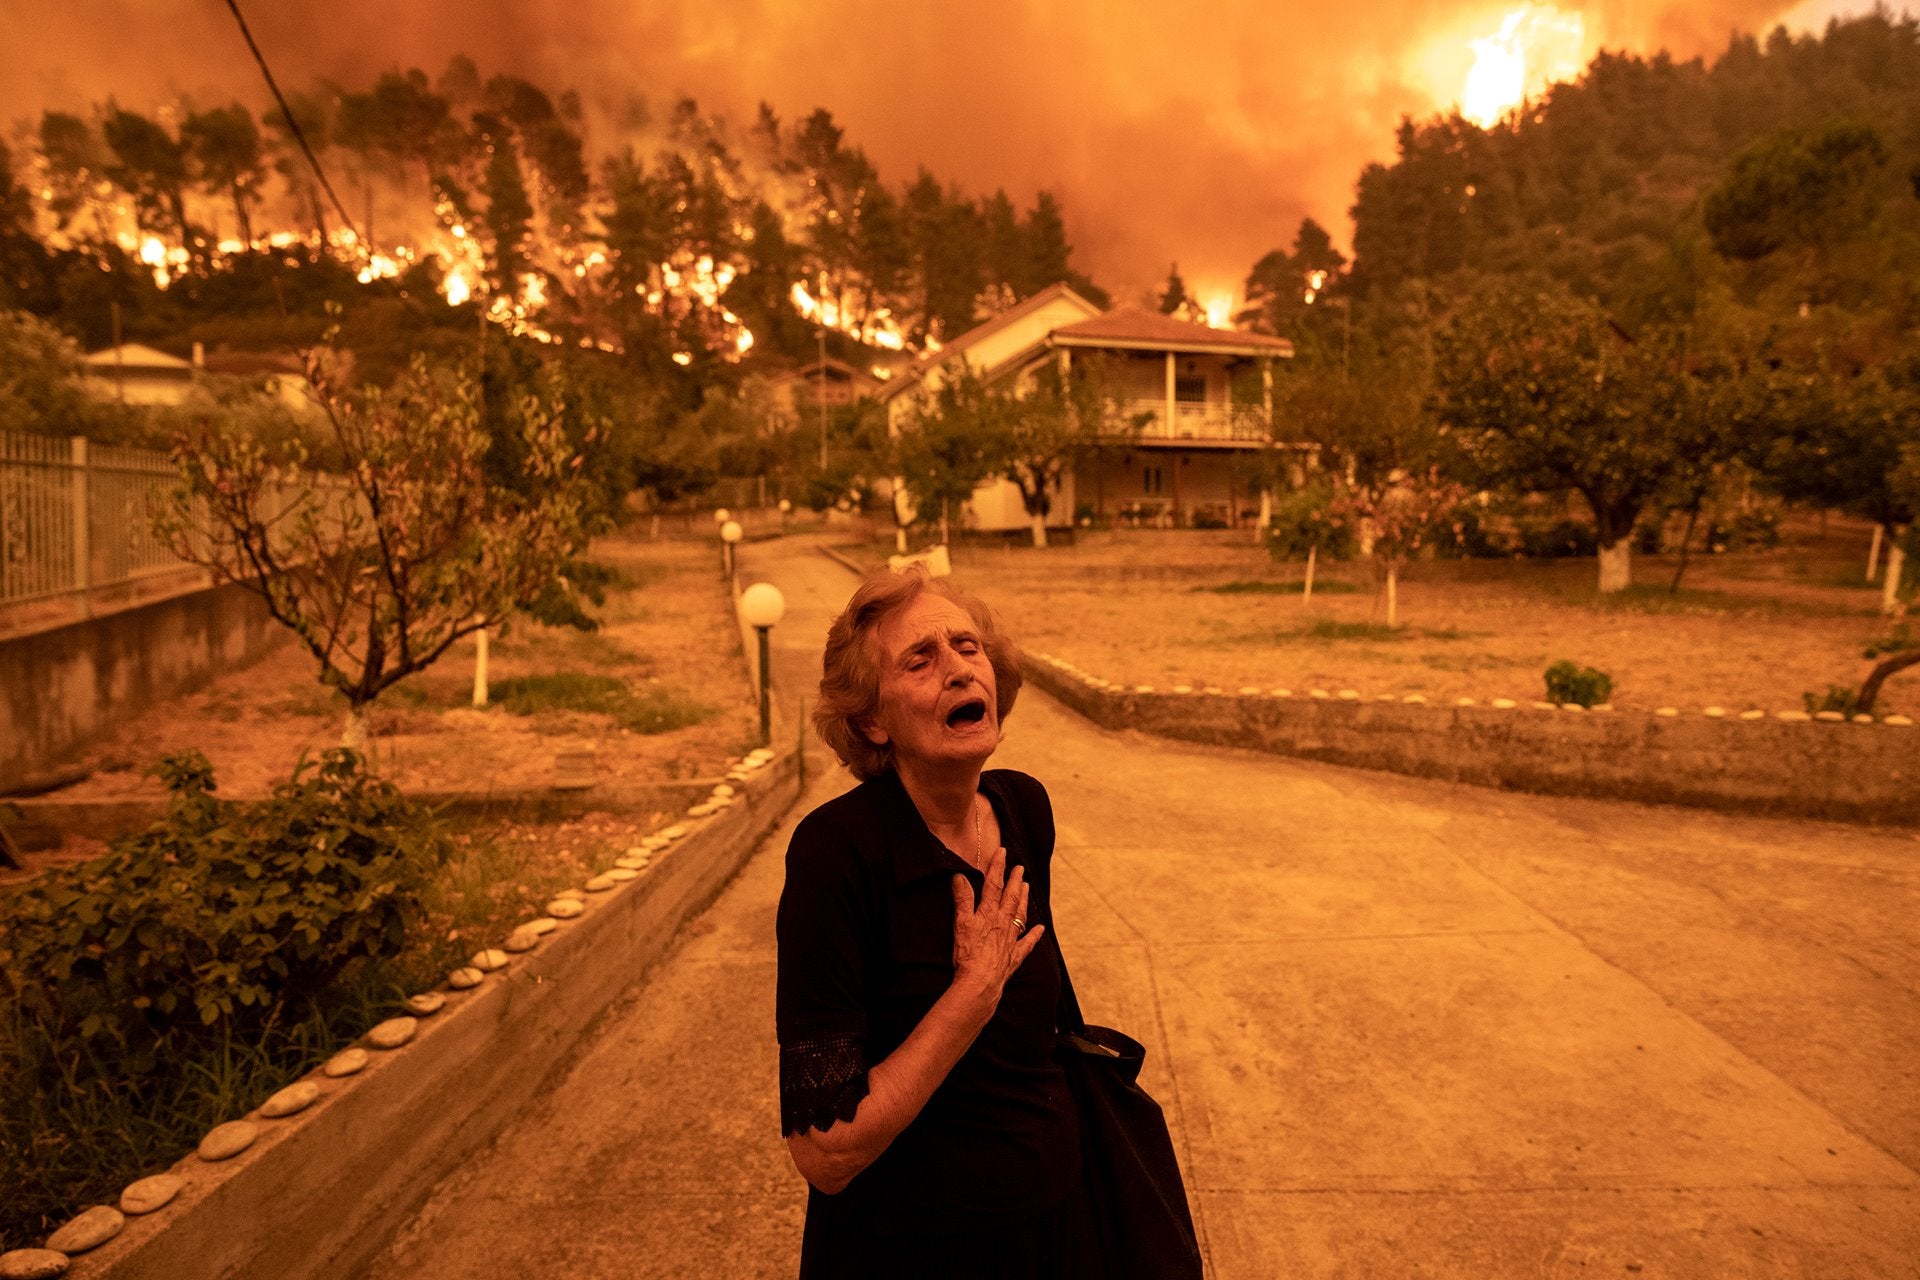 Greek photographer Konstantinos Tsakalidis won the Singles category for this photo from the wildfires in Greece last summer.